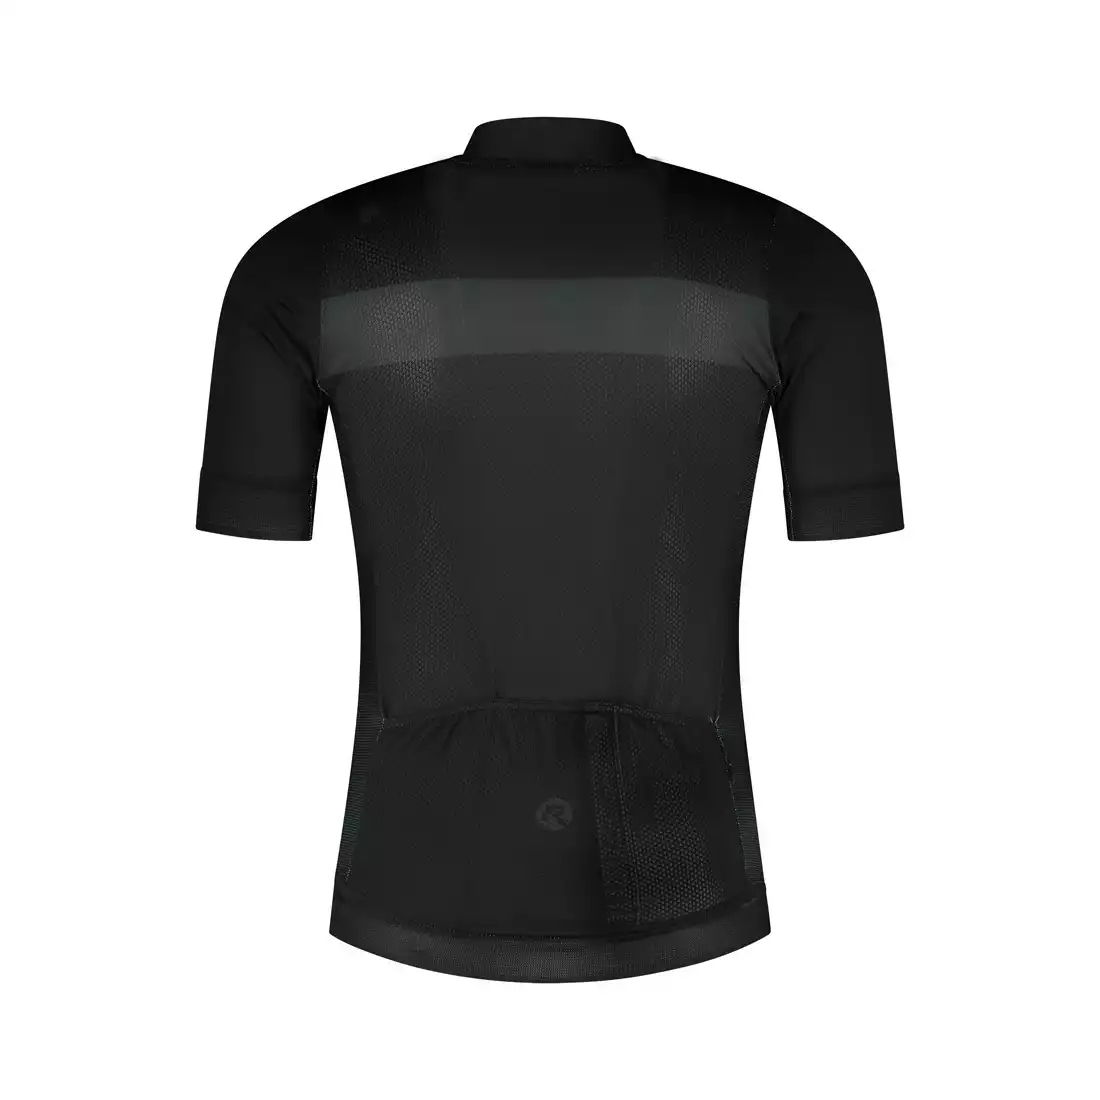 ROGELLI PRIME men's cycling jersey black and gray